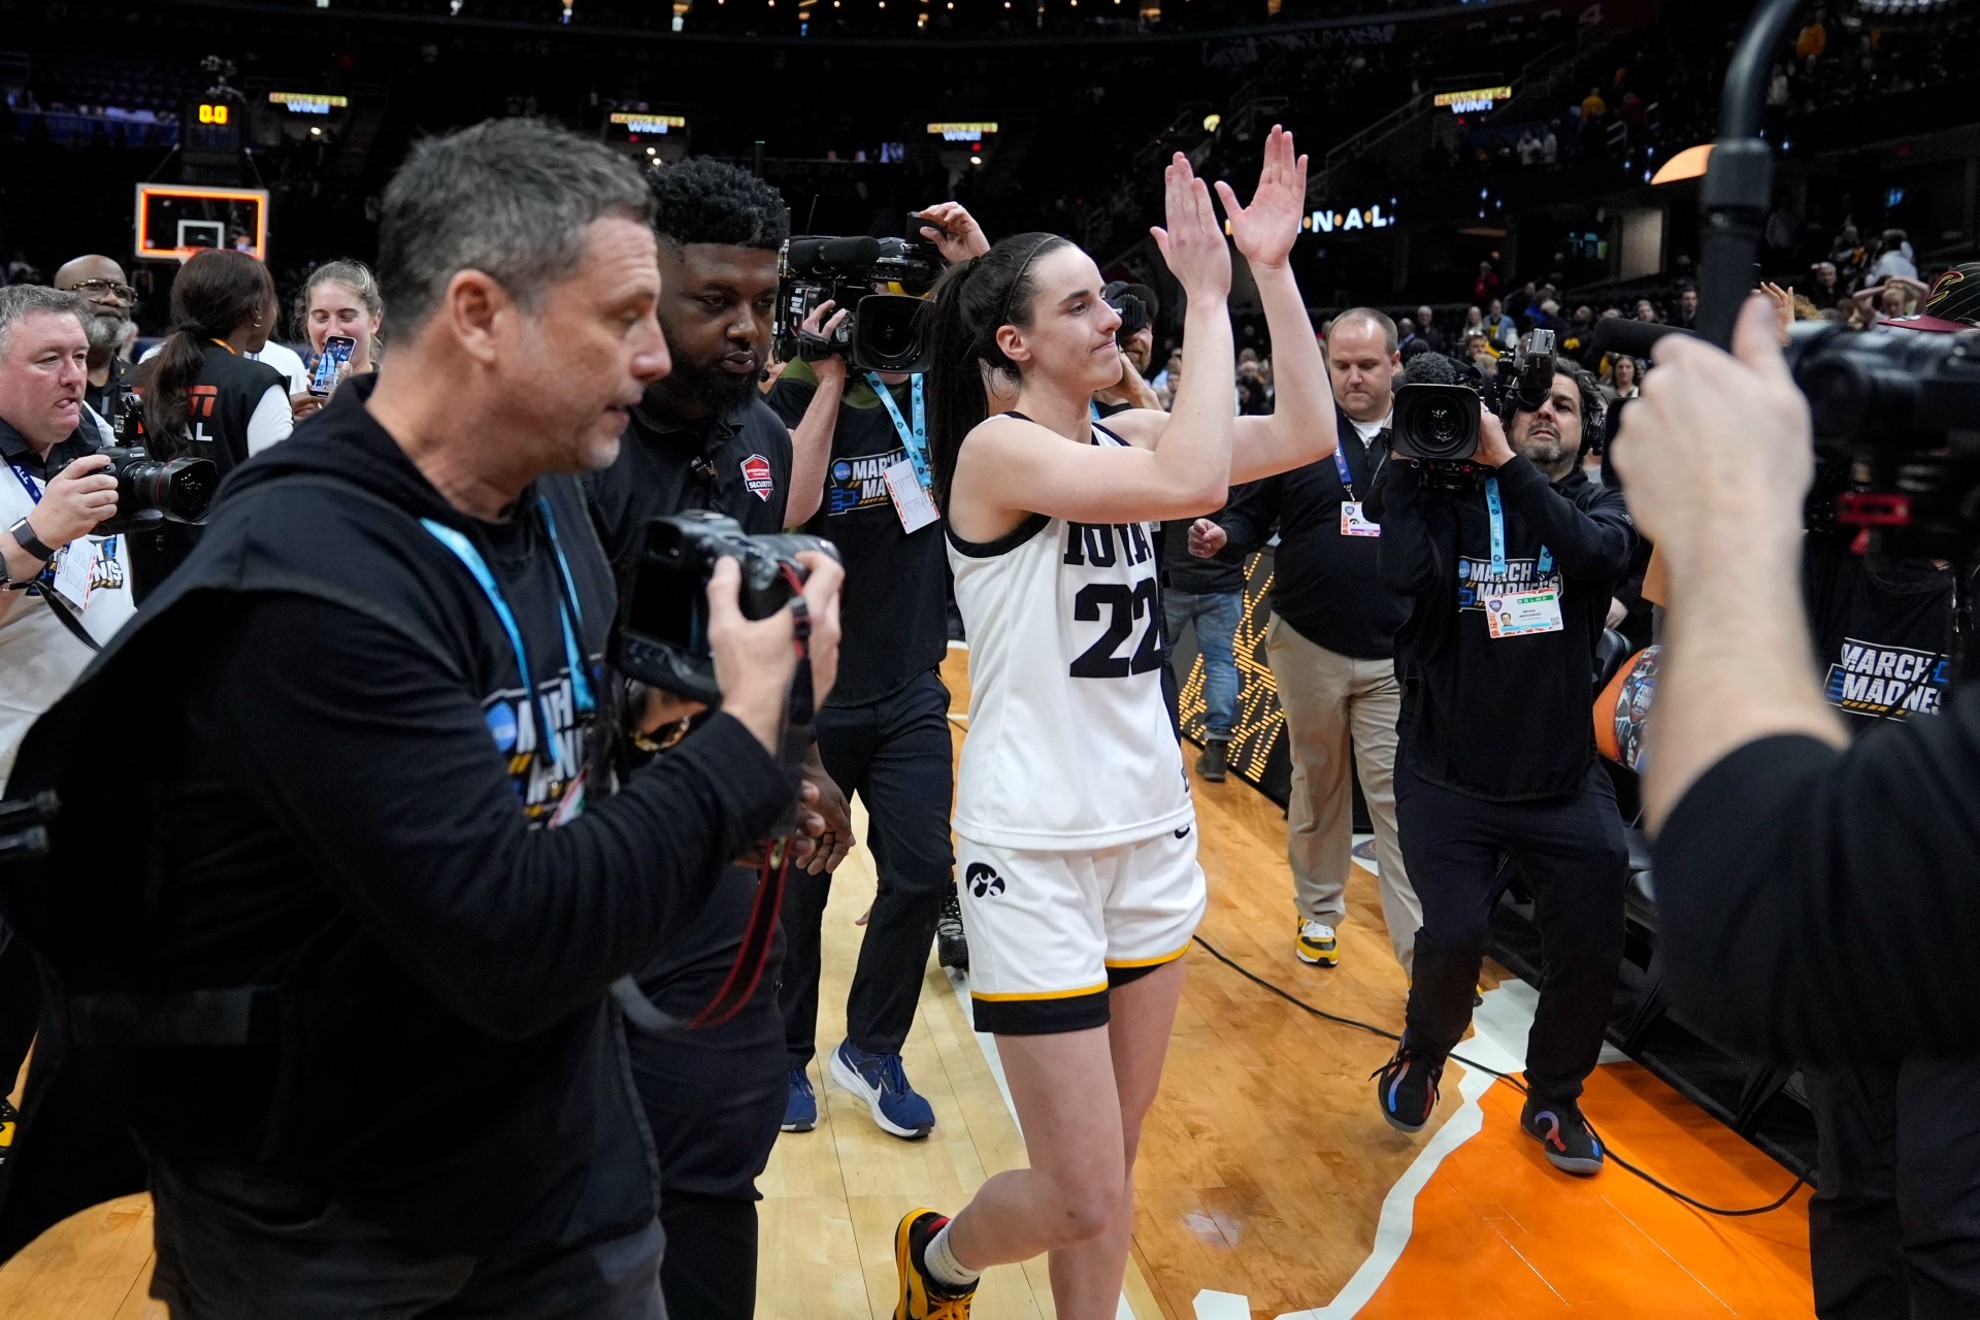 Iowa guard Caitlin Clark walks off the court after a Final Four college basketball game